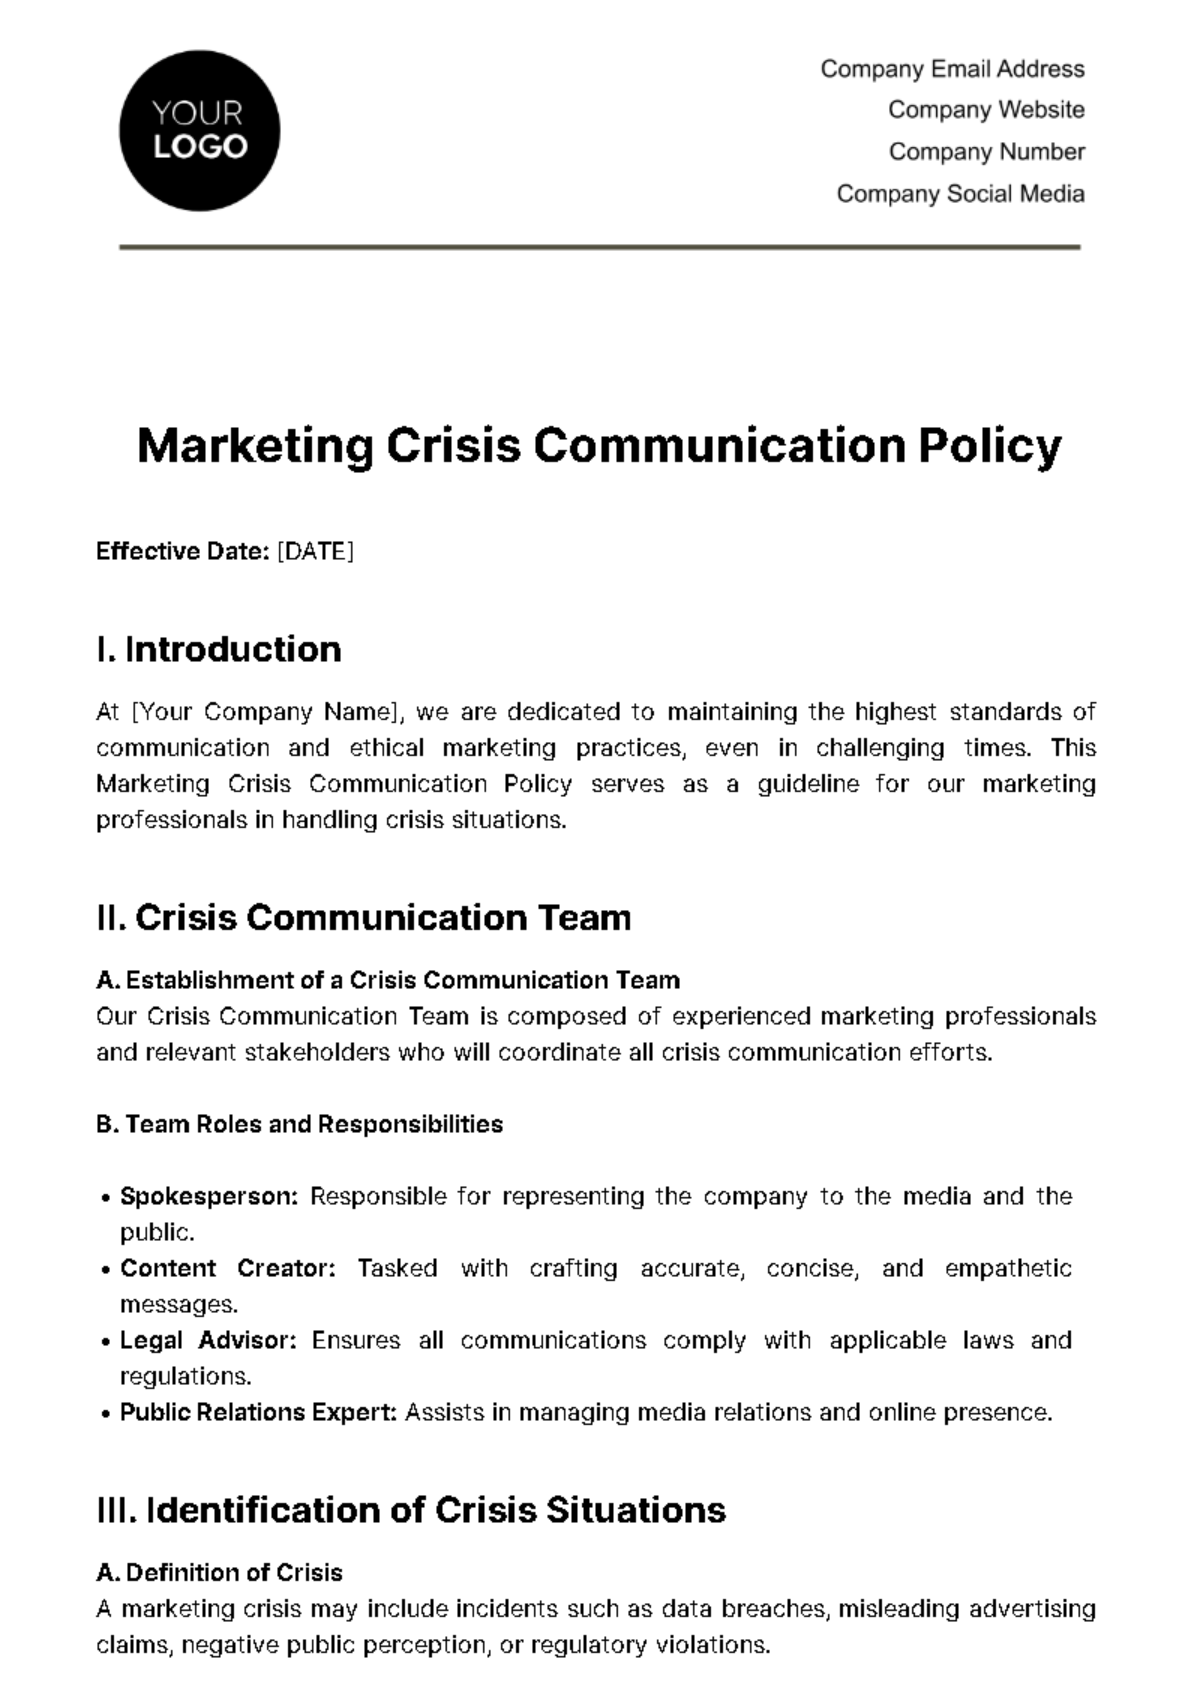 Marketing Crisis Communication Policy Template